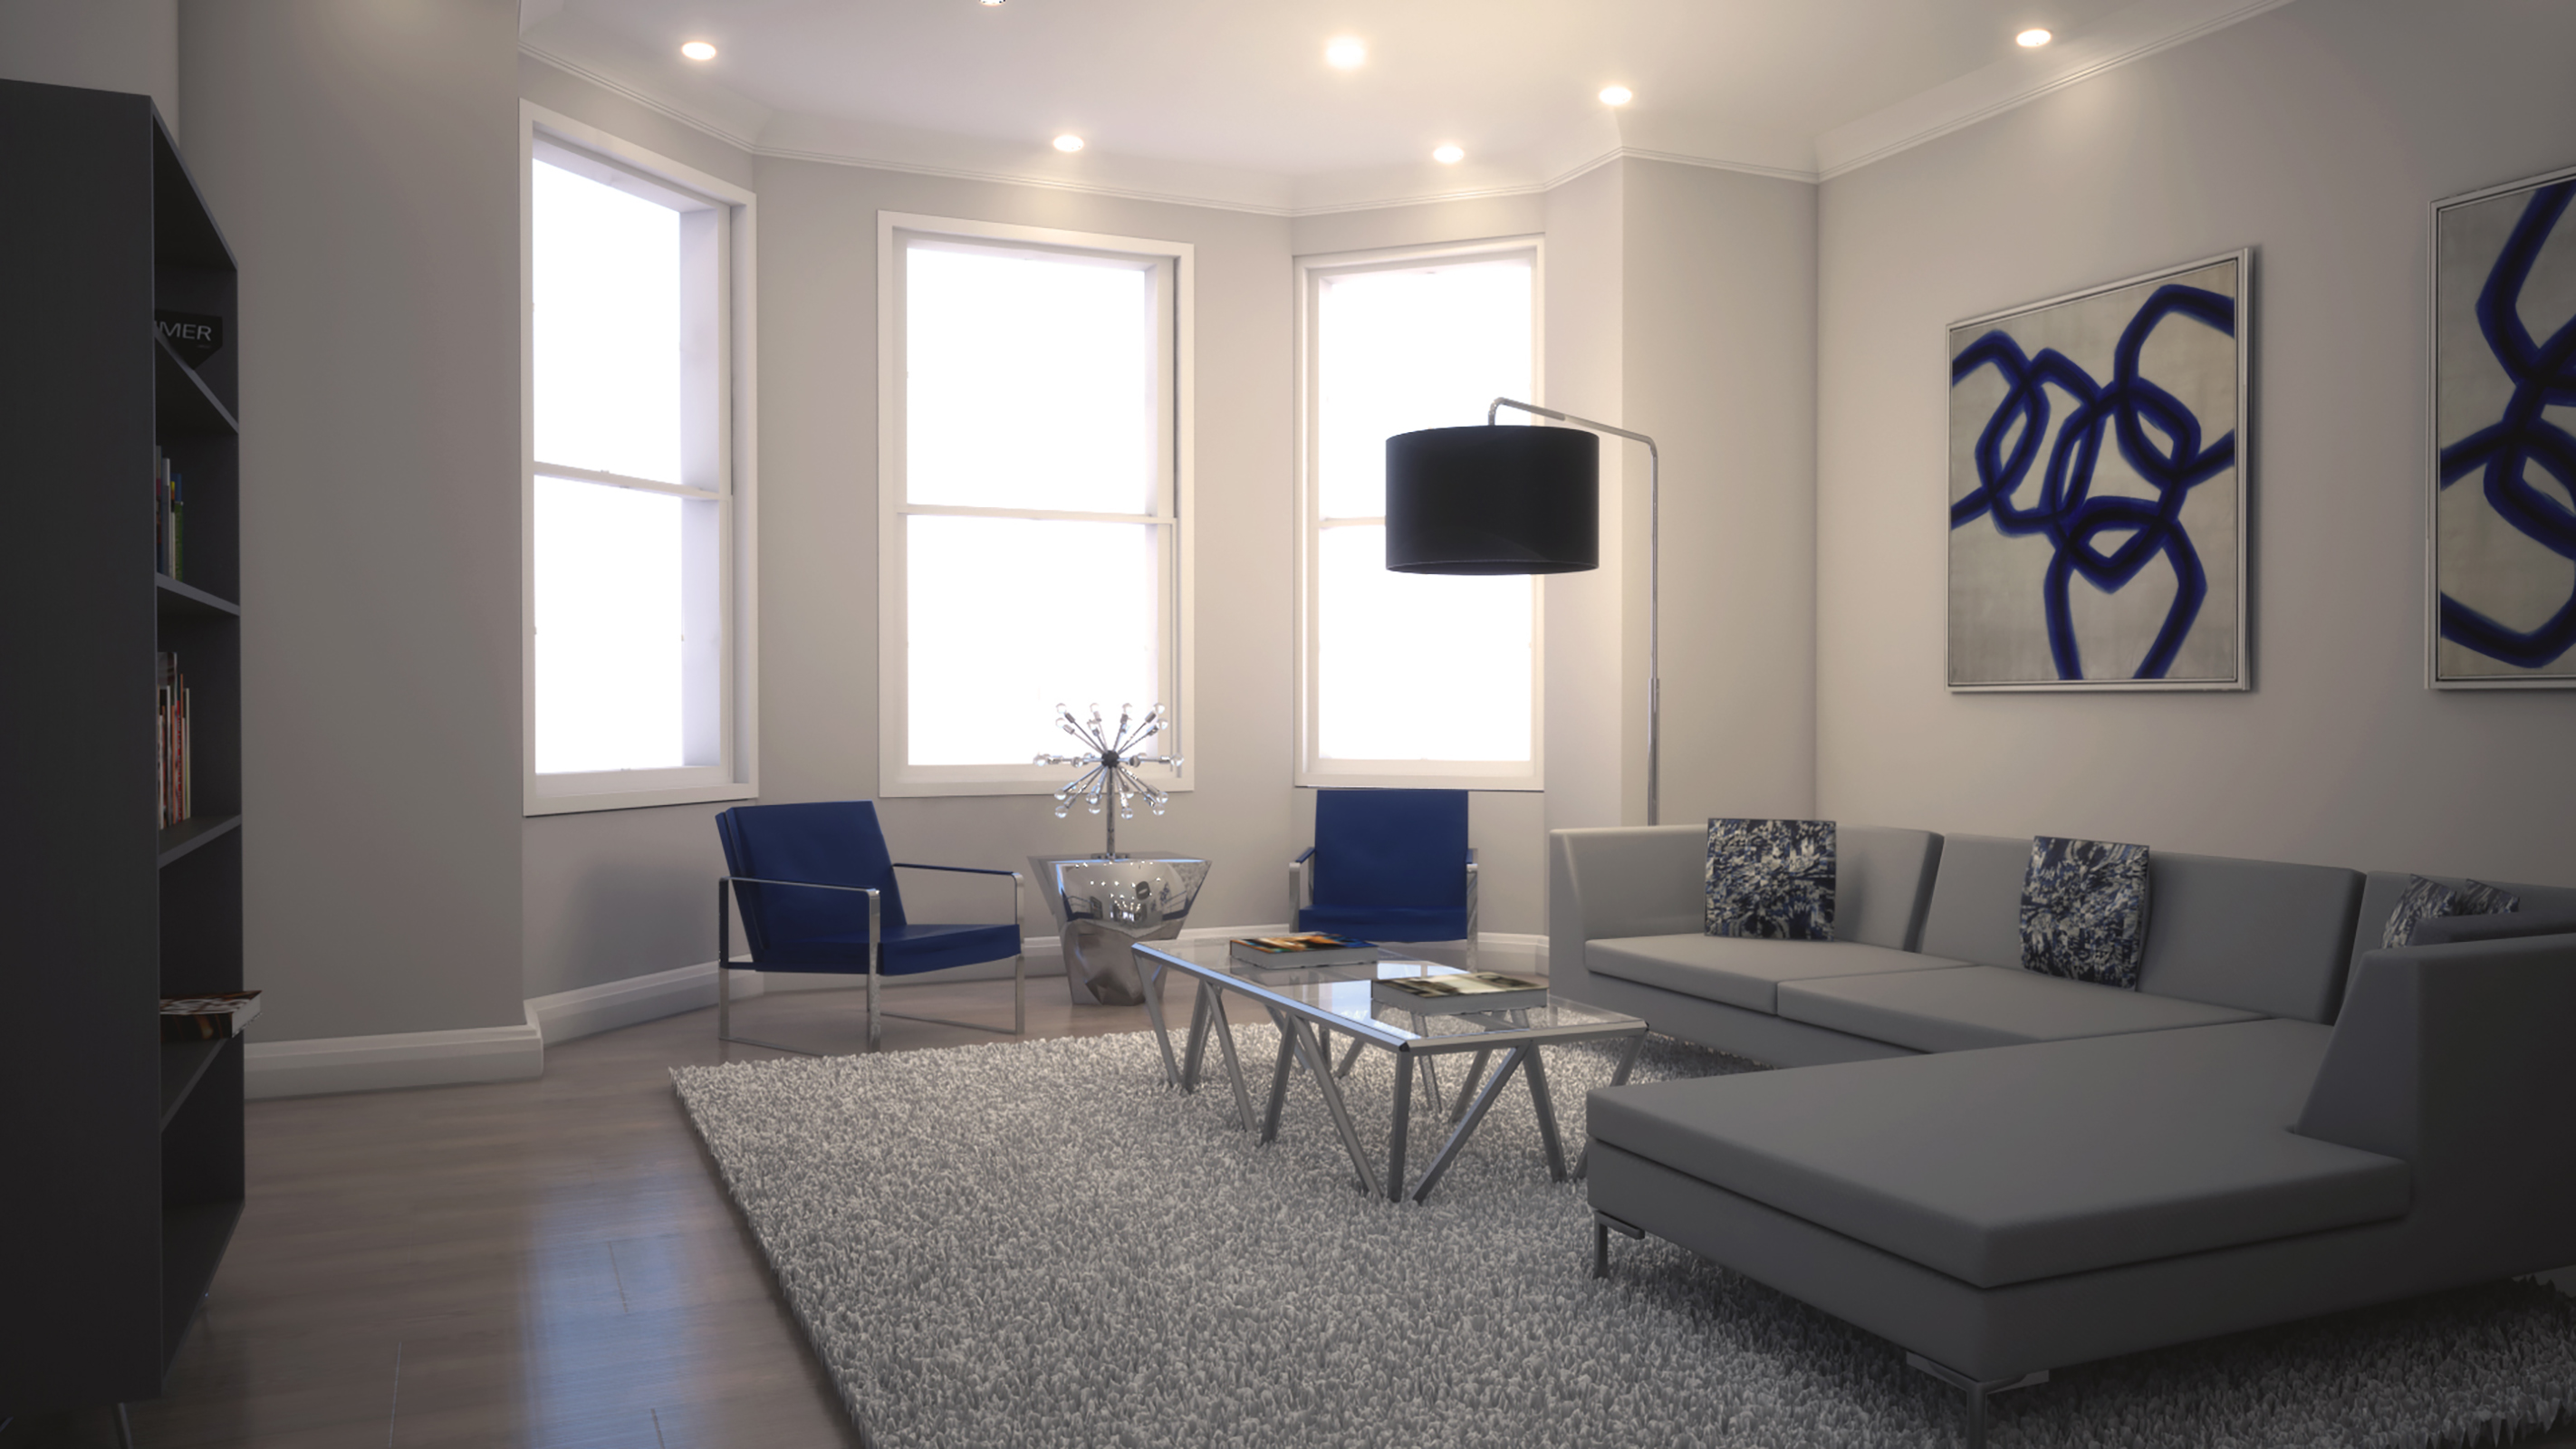 hines-vermont-ave-living-room-v5